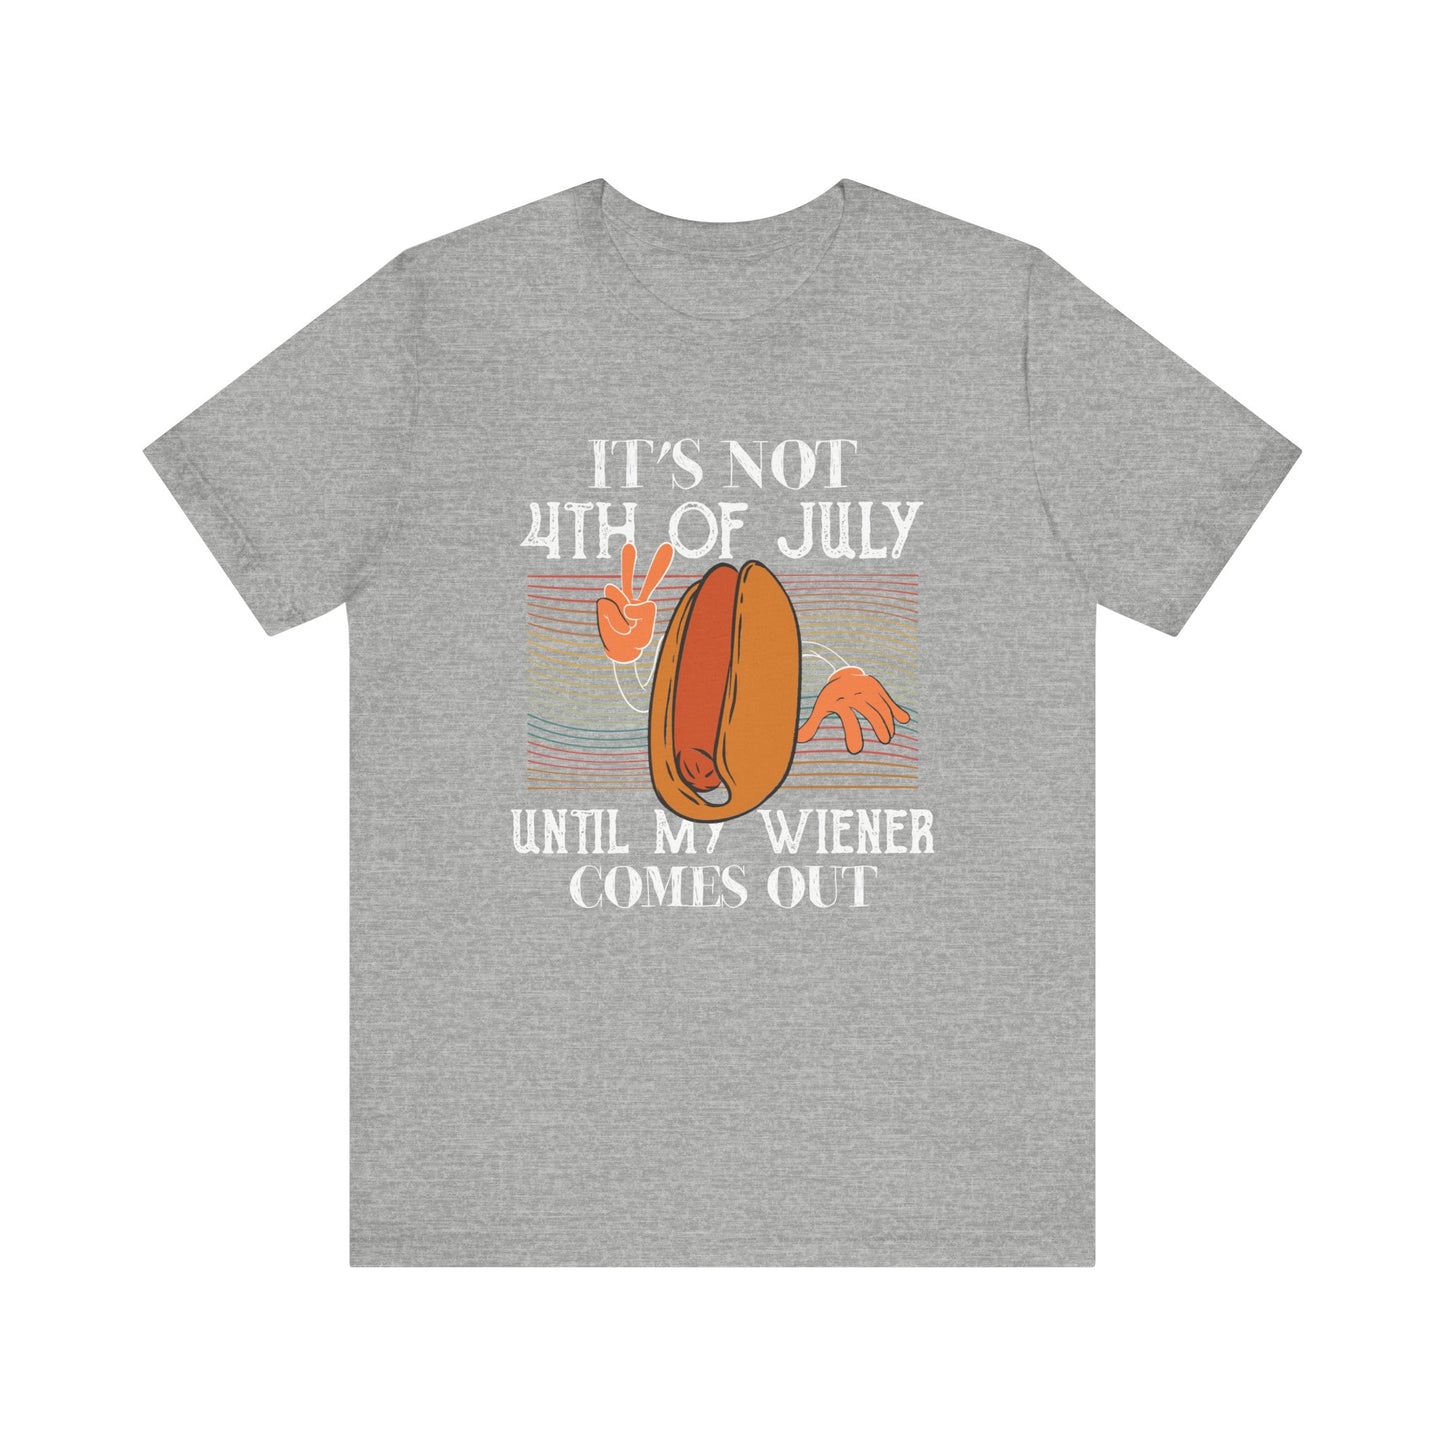 It's Not 4th Of July Until My Weiner Comes Out Tee